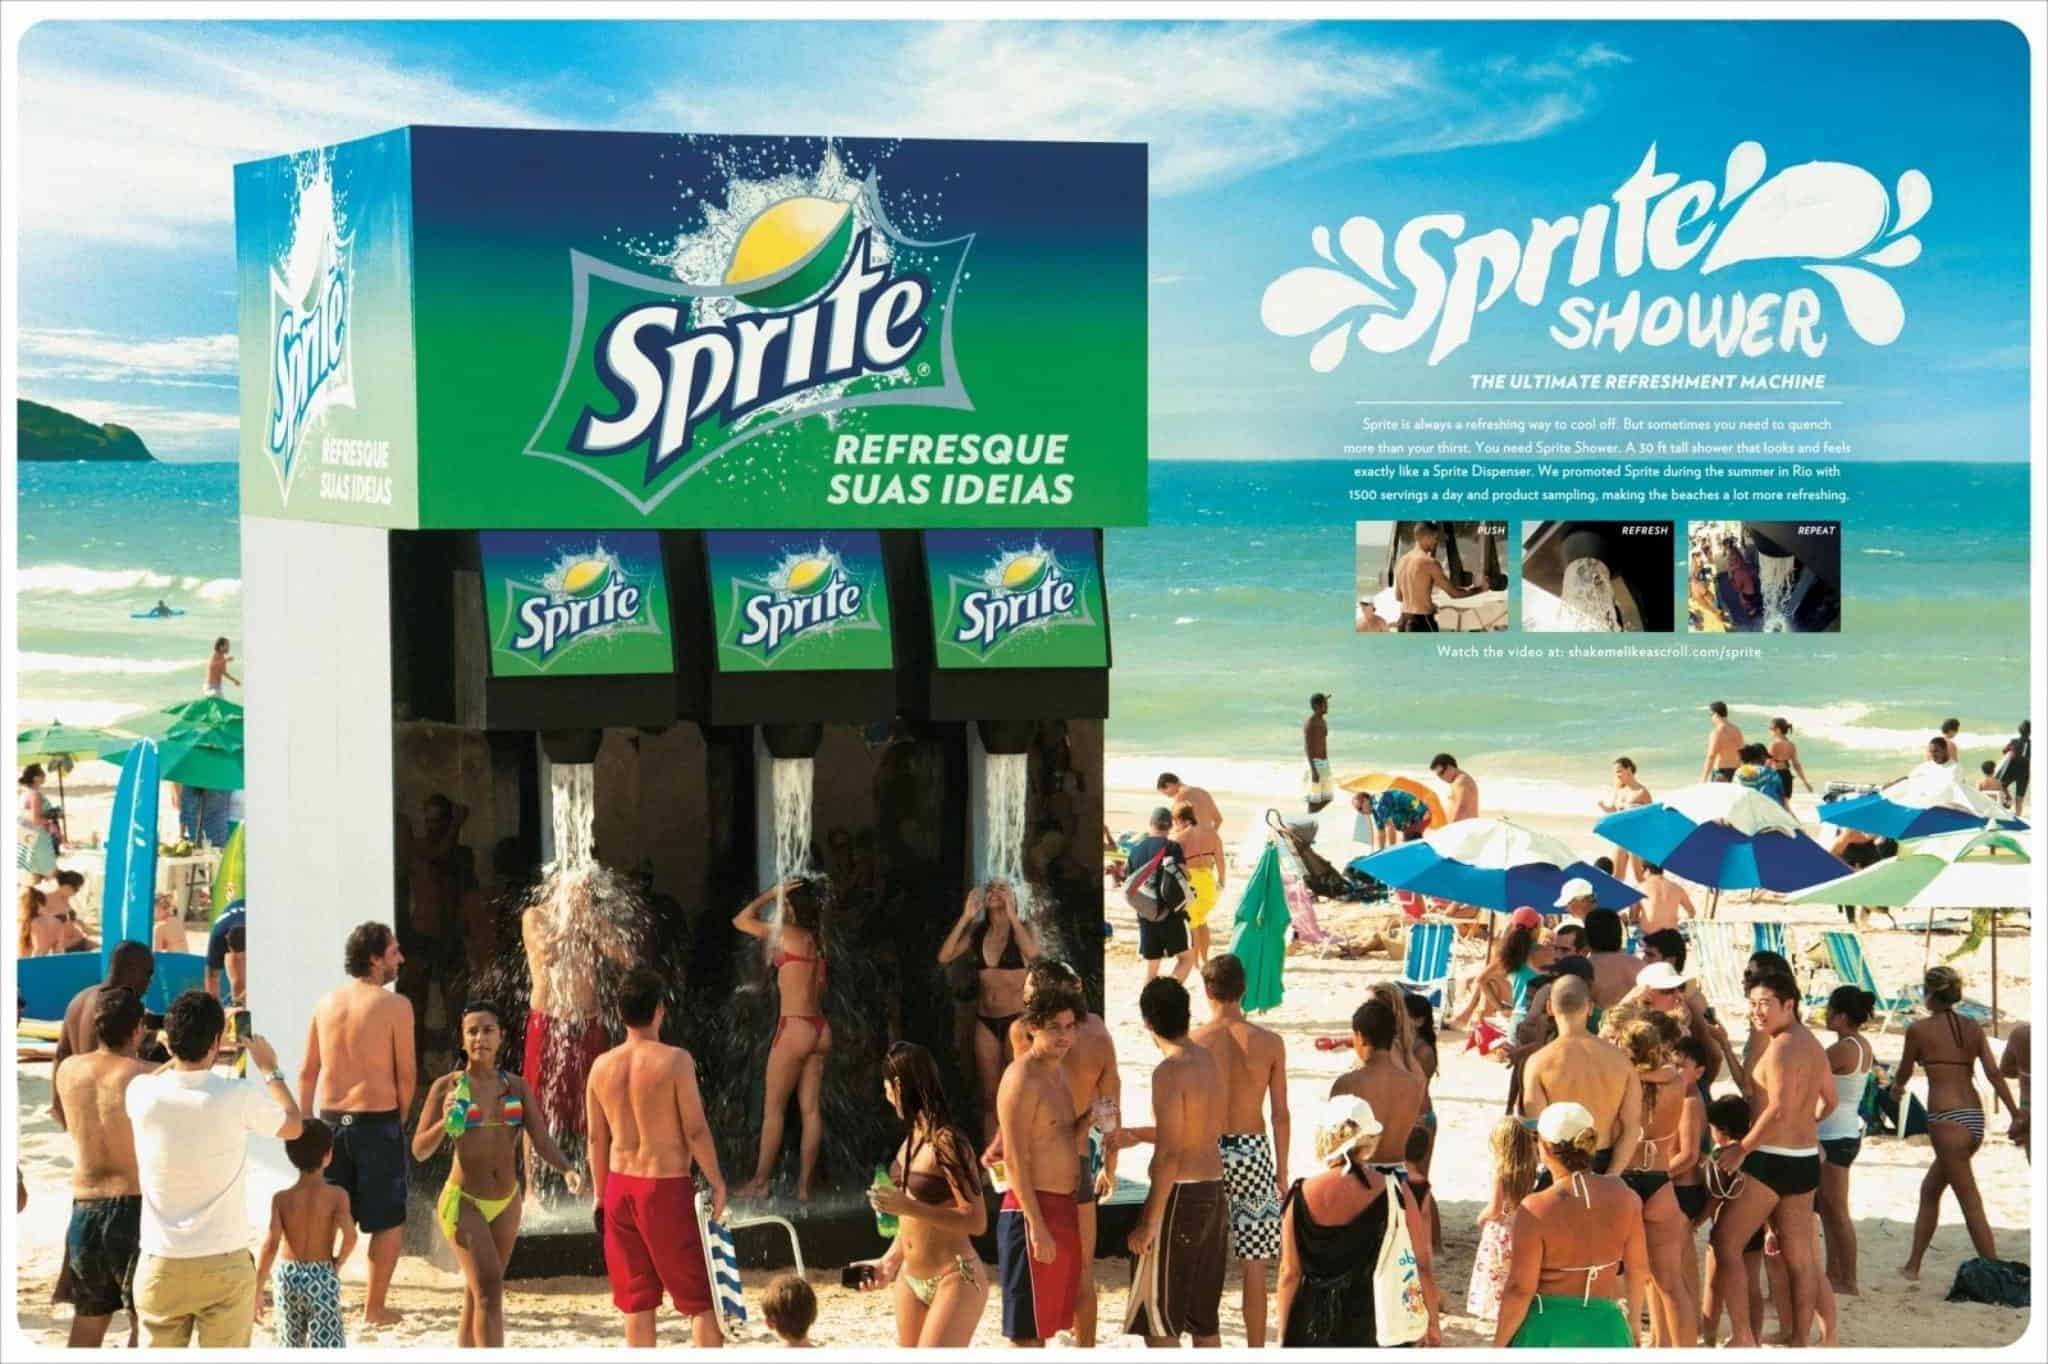 A print advertisement from Sprite